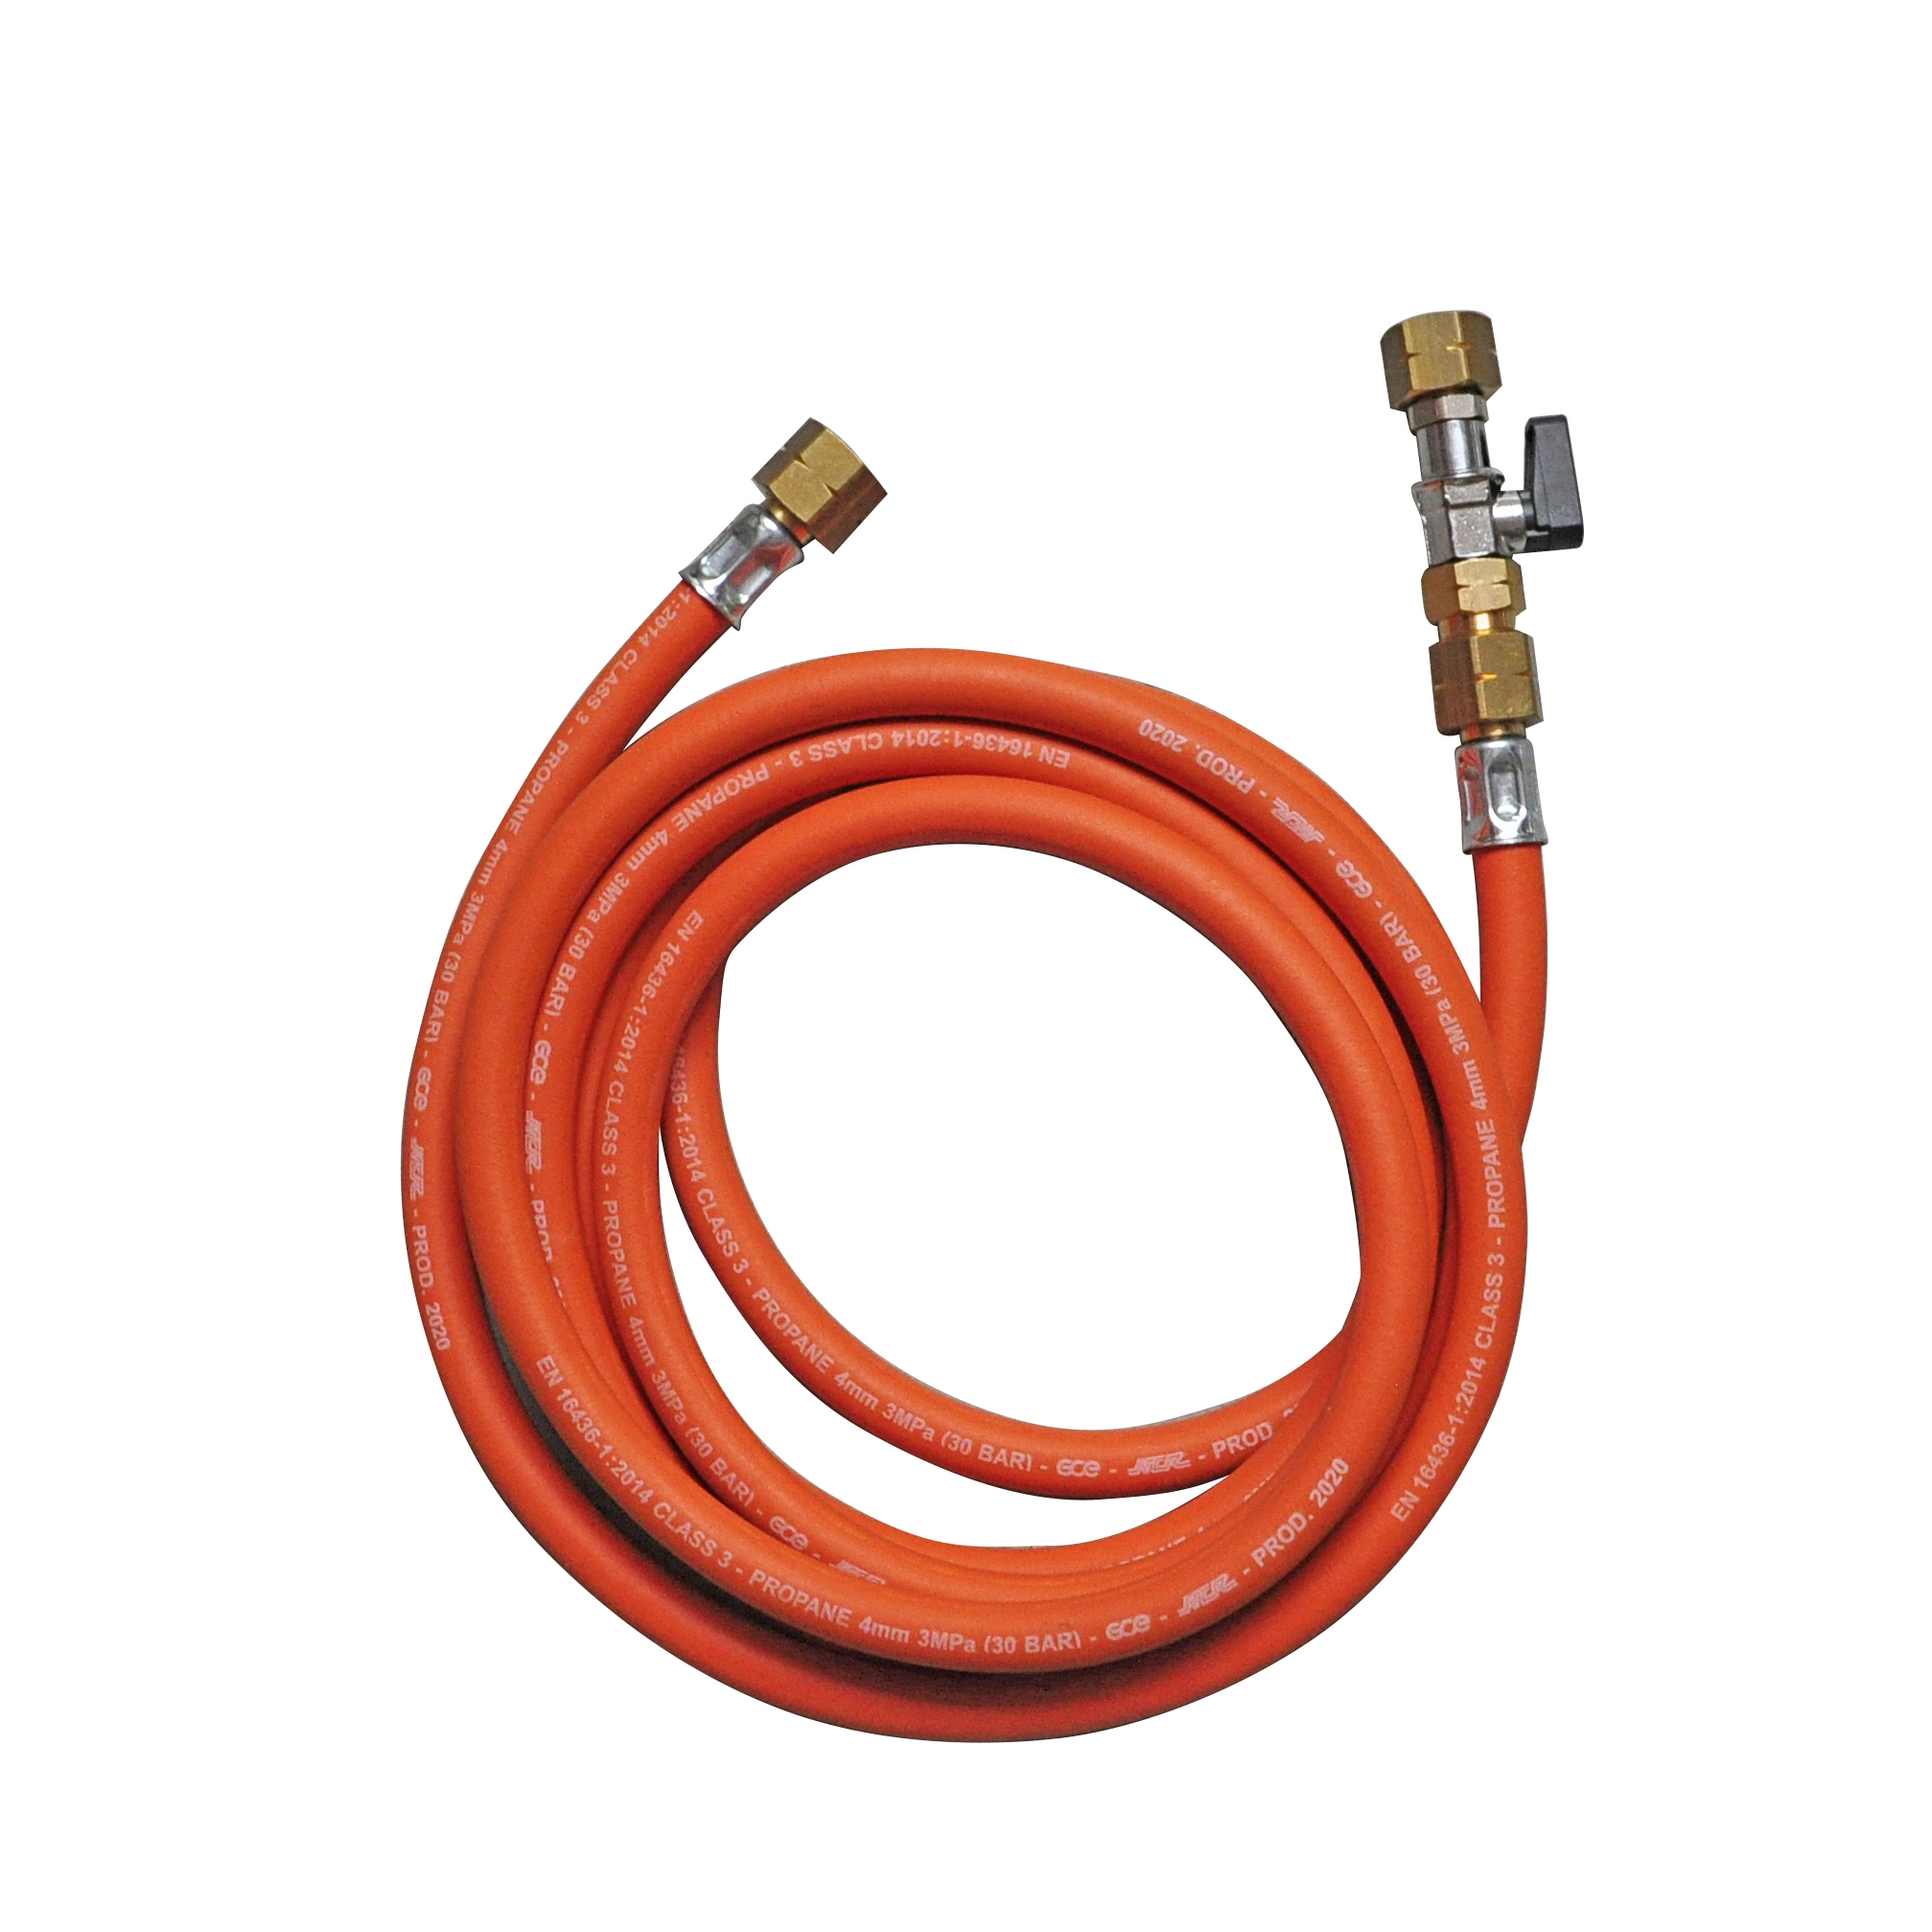 Connecting accesory for ignition module for gas standpipe